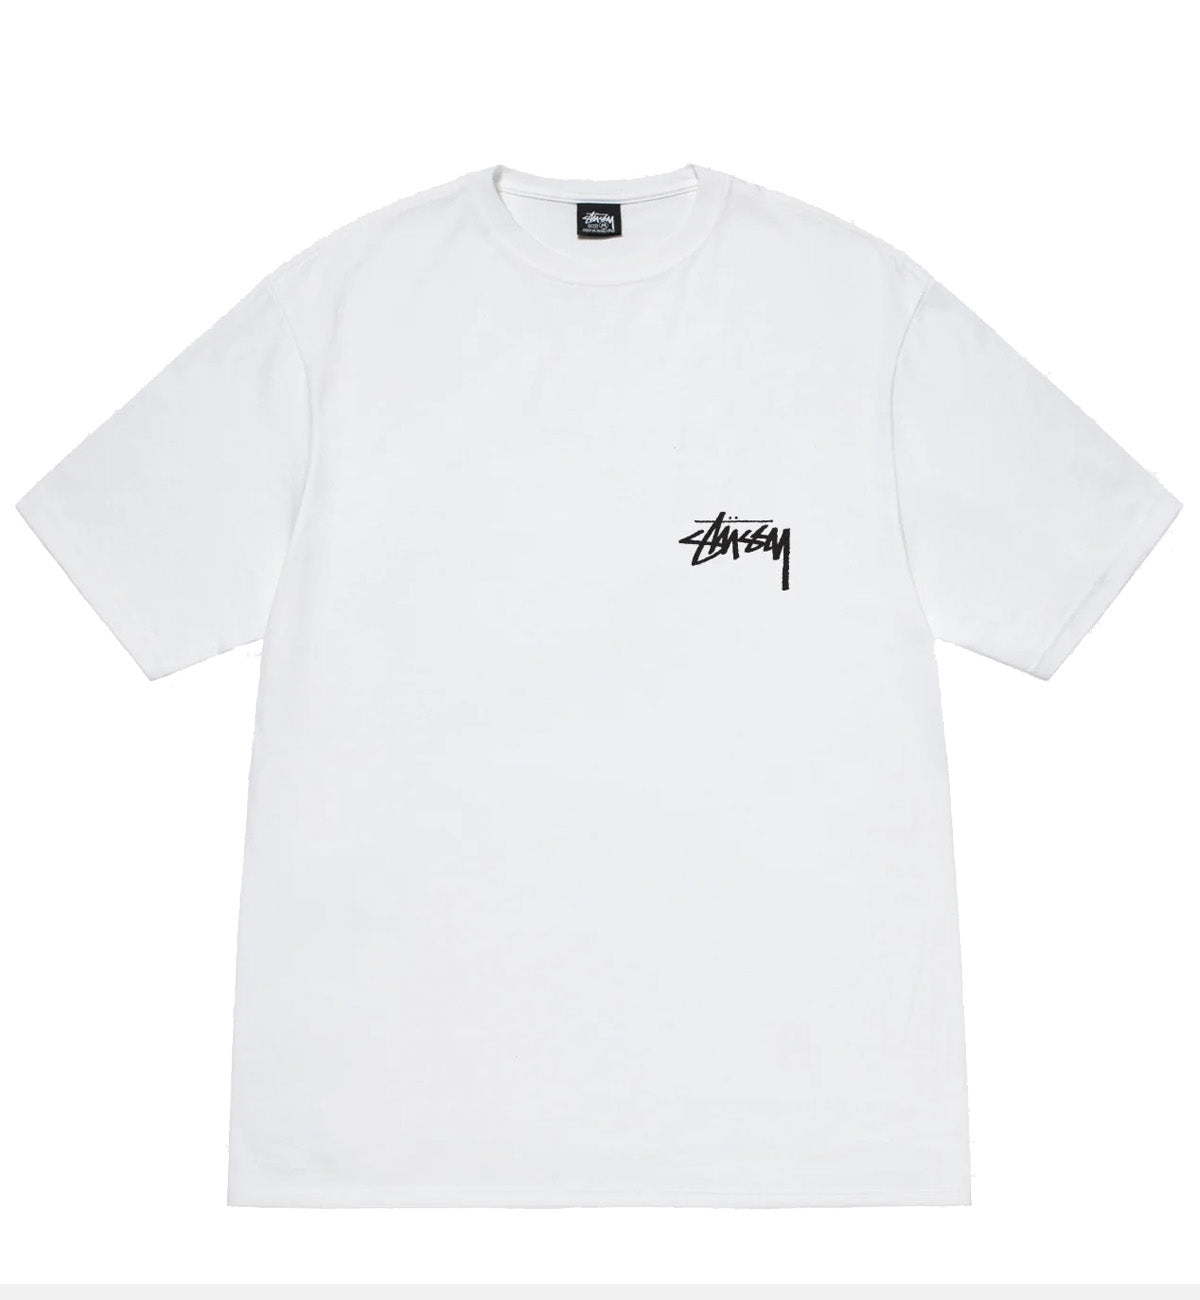 Stussy Suits Tee (White) – The Factory KL